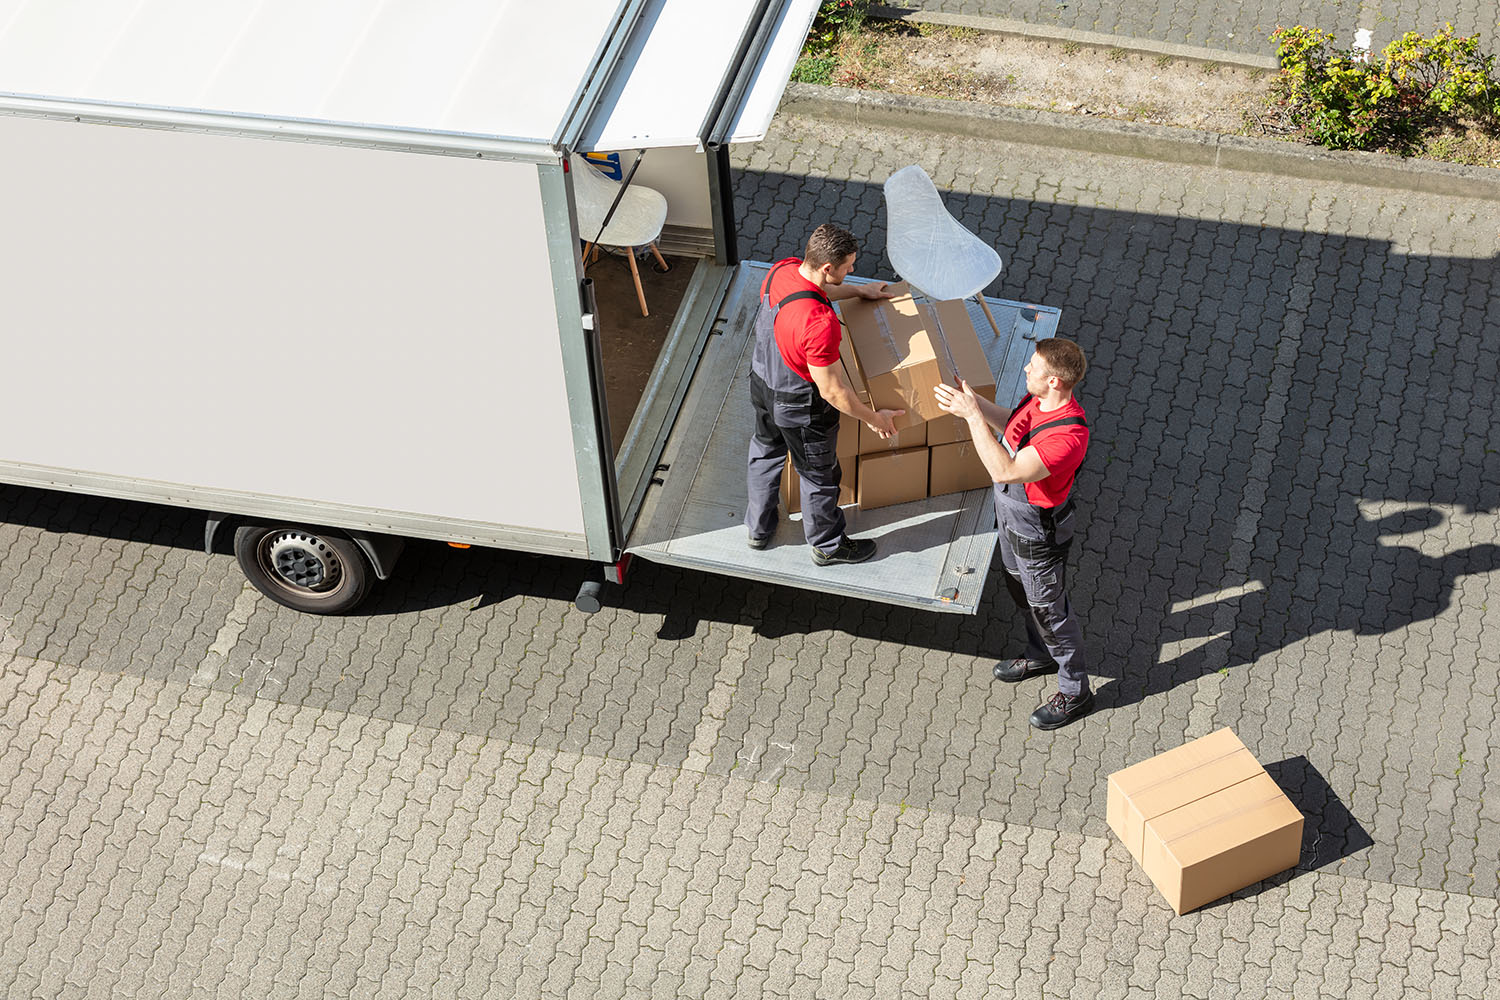 Male Movers Unloading The Cardboard Boxes Form Truck